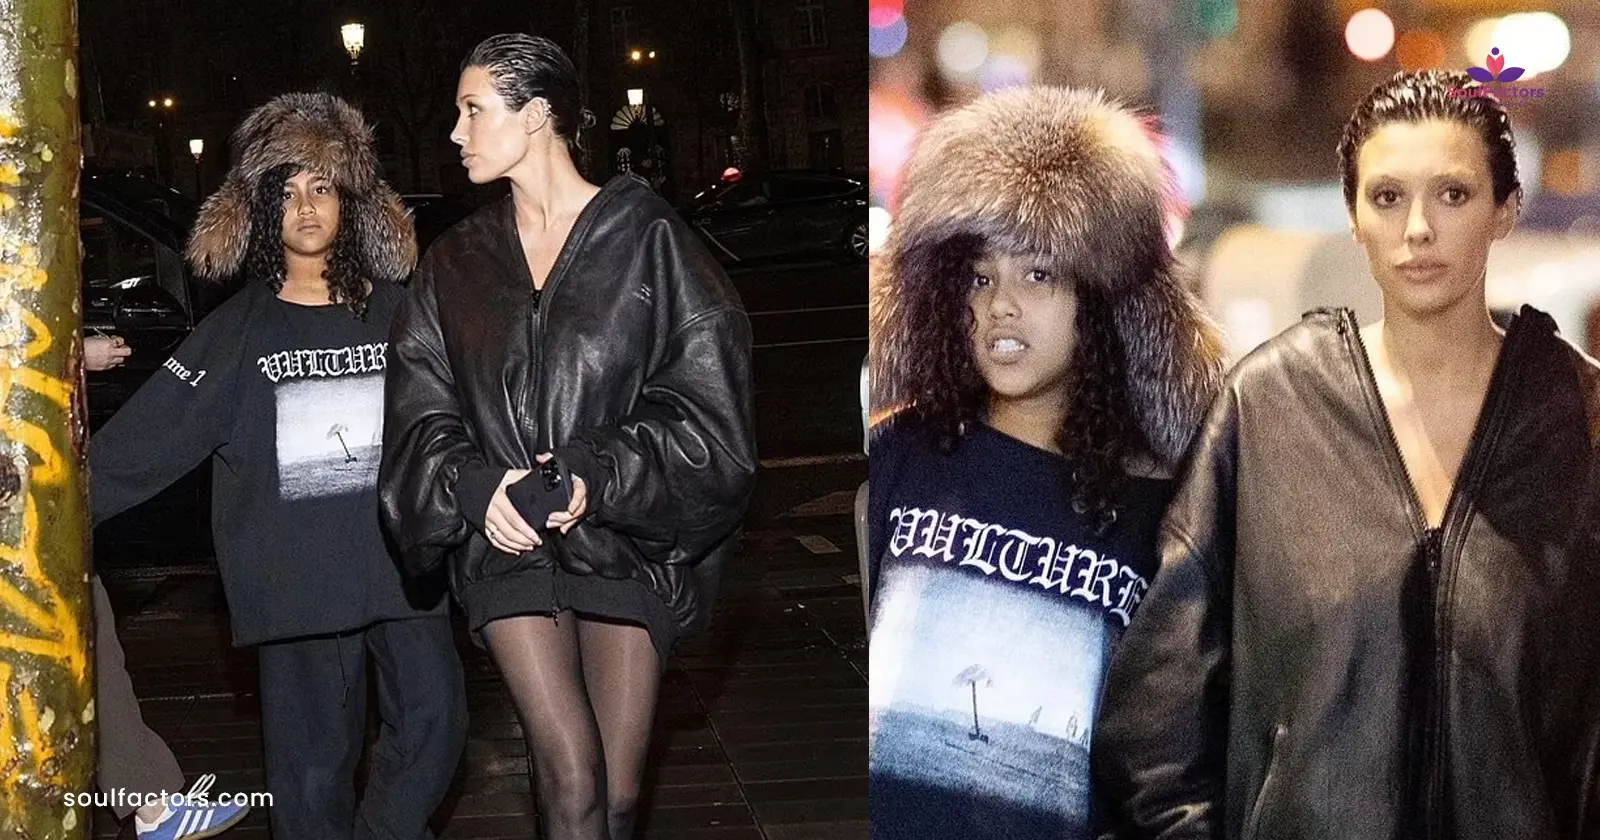 Kanye West's wife and North West in Paris